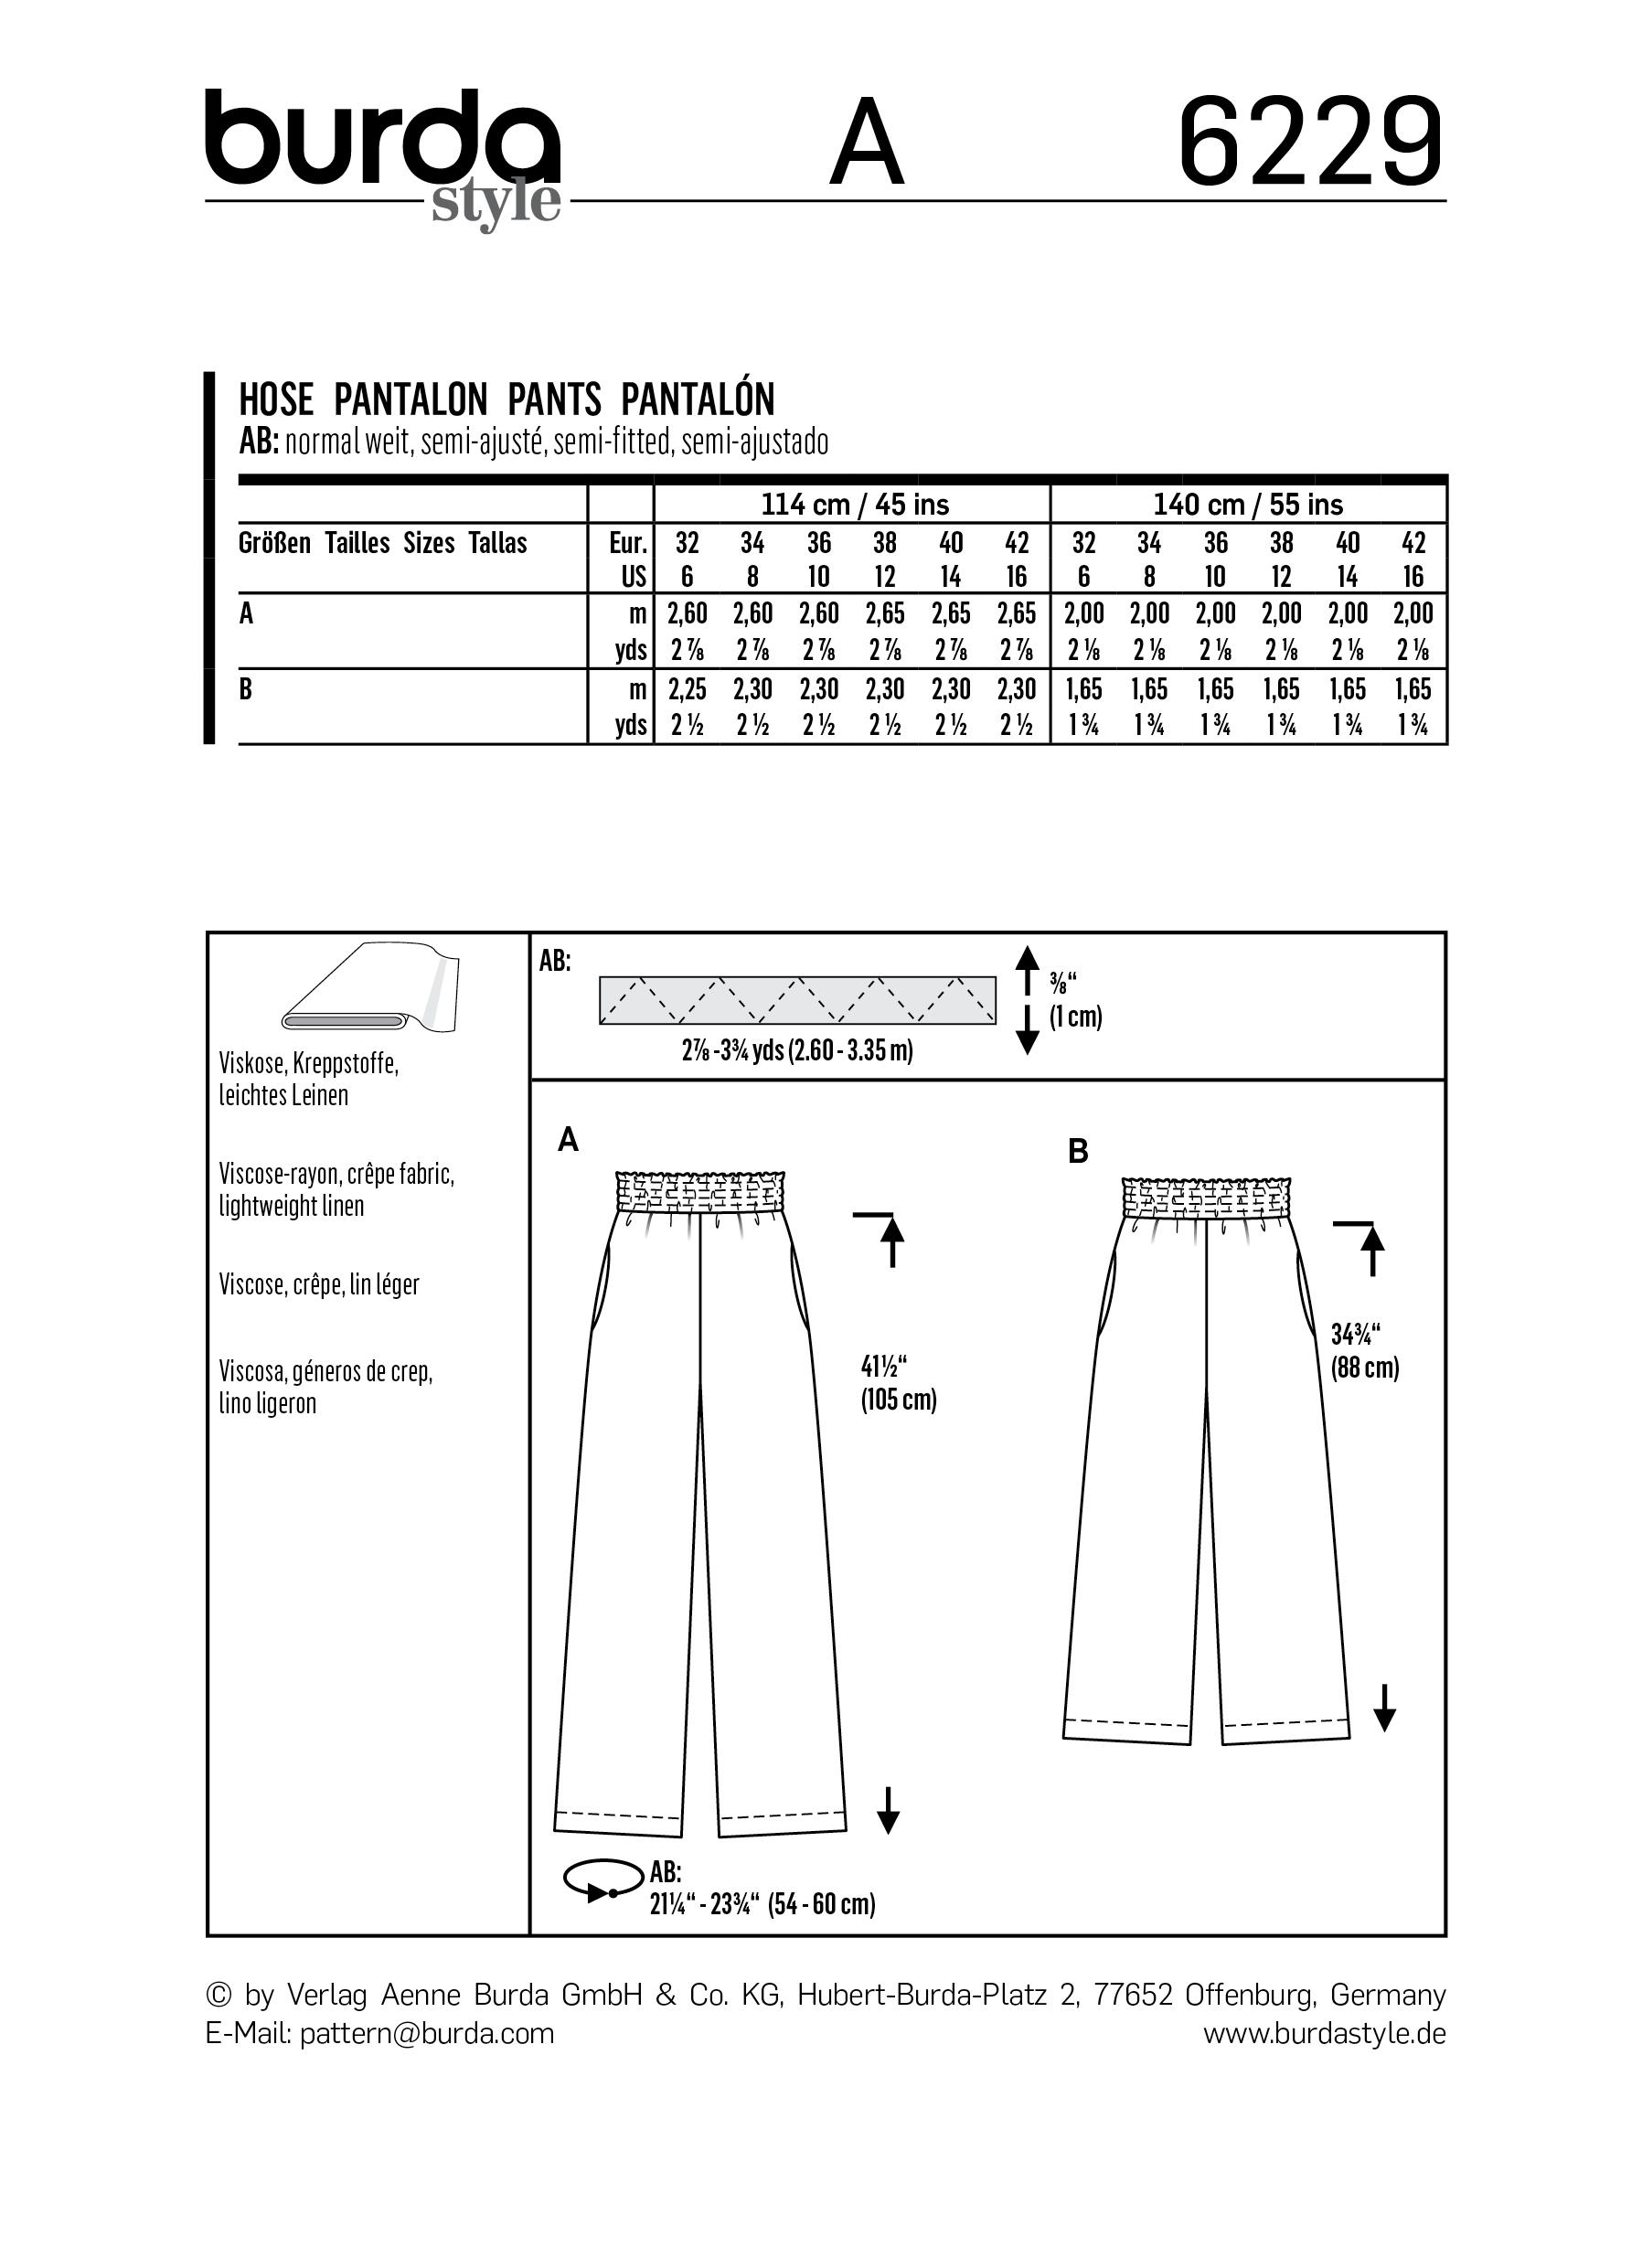 Burda B6229 Trousers/Pants with Elastic Waist with Pockets in Seams Sewing Pattern